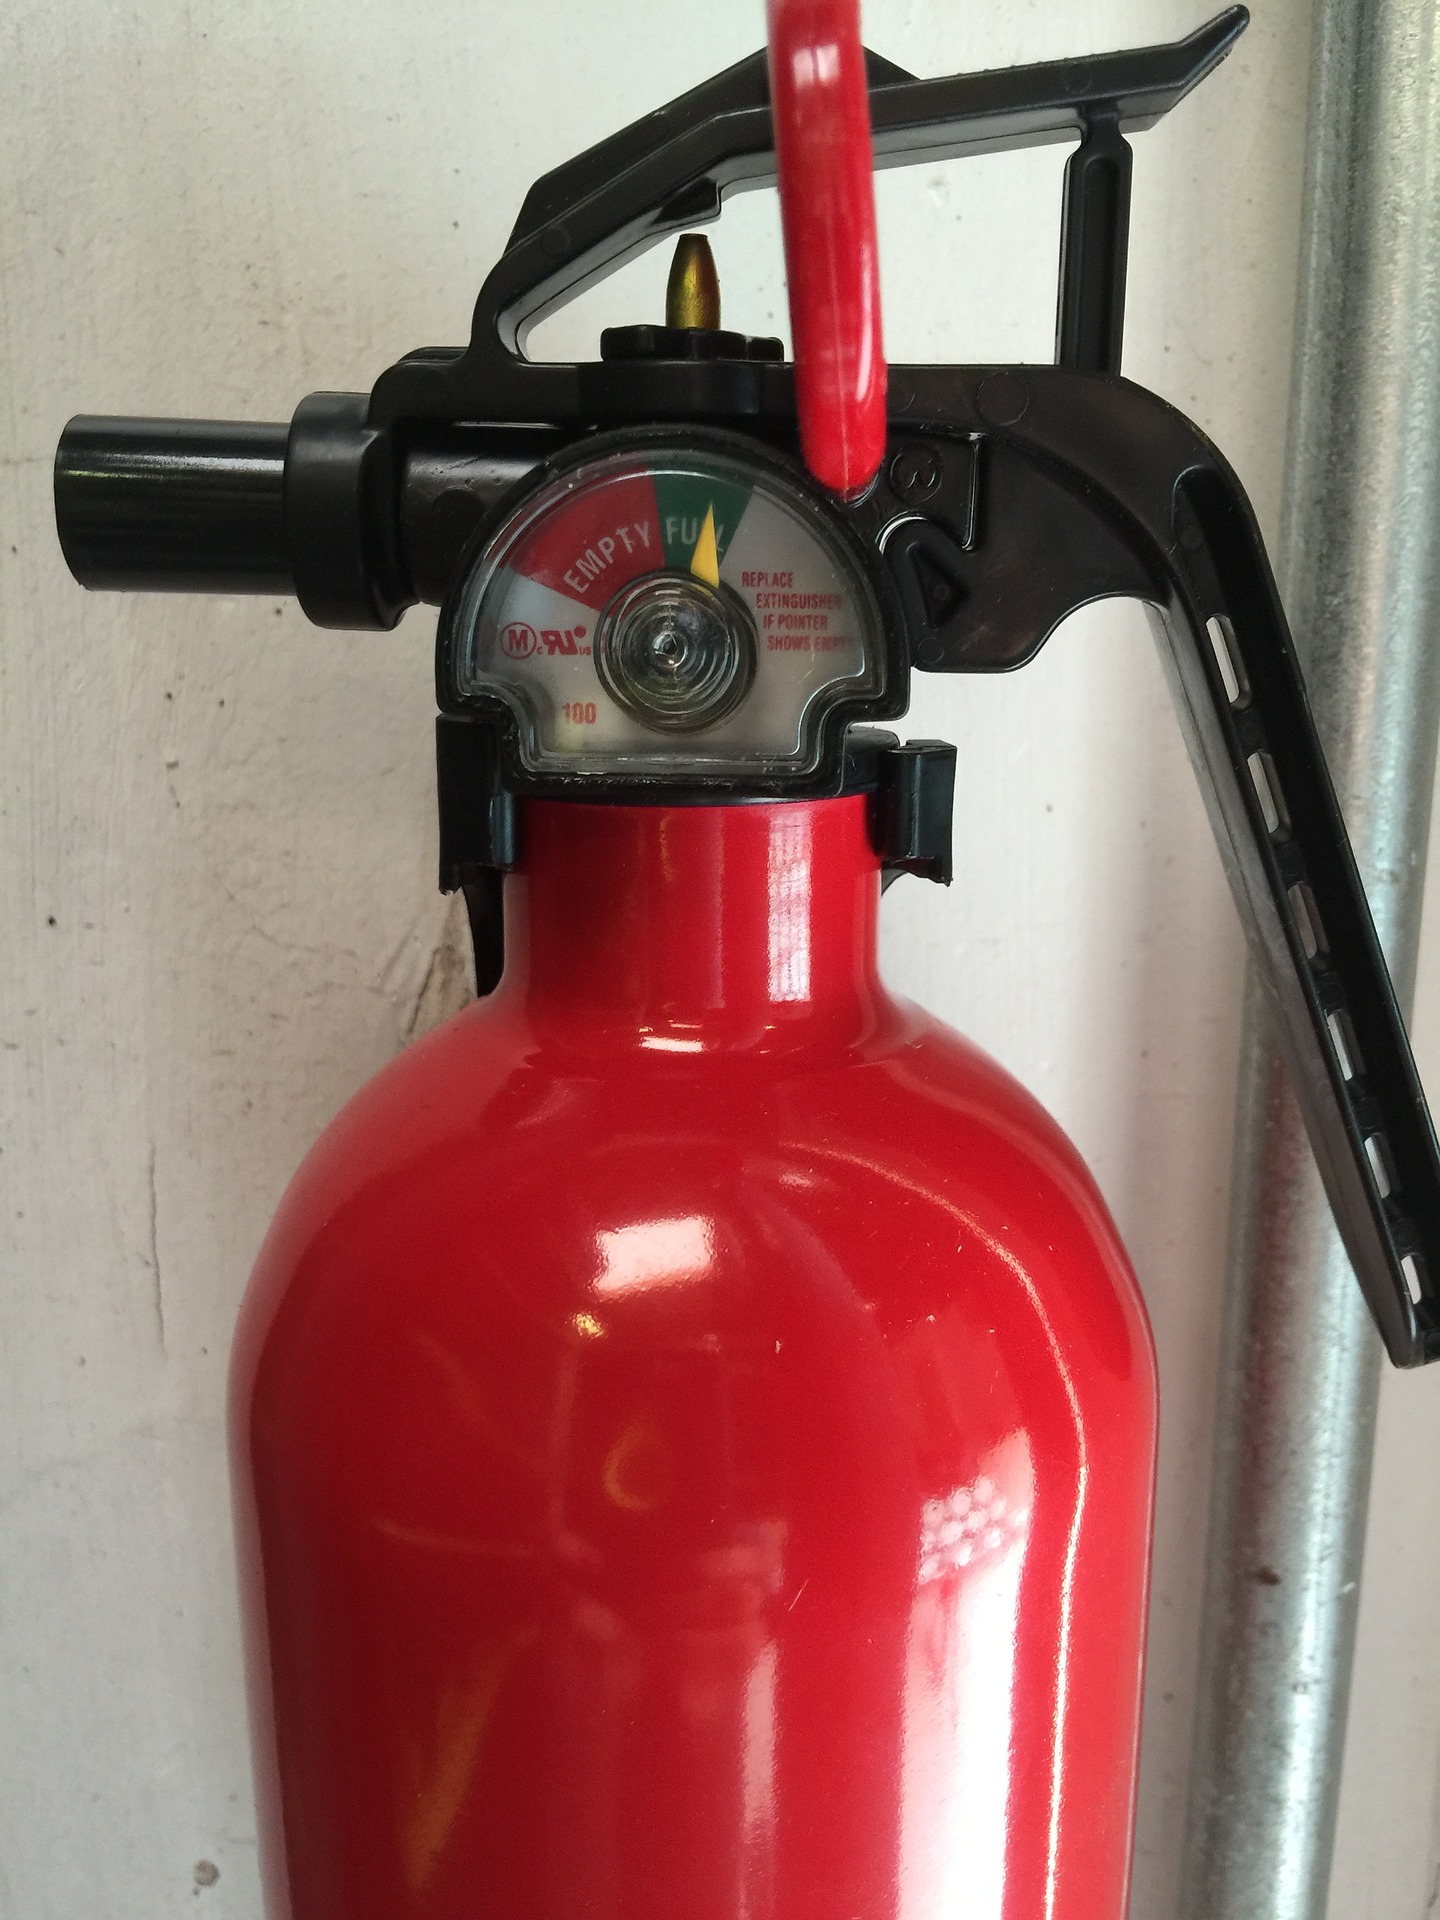 Close-up of a red fire extinguisher